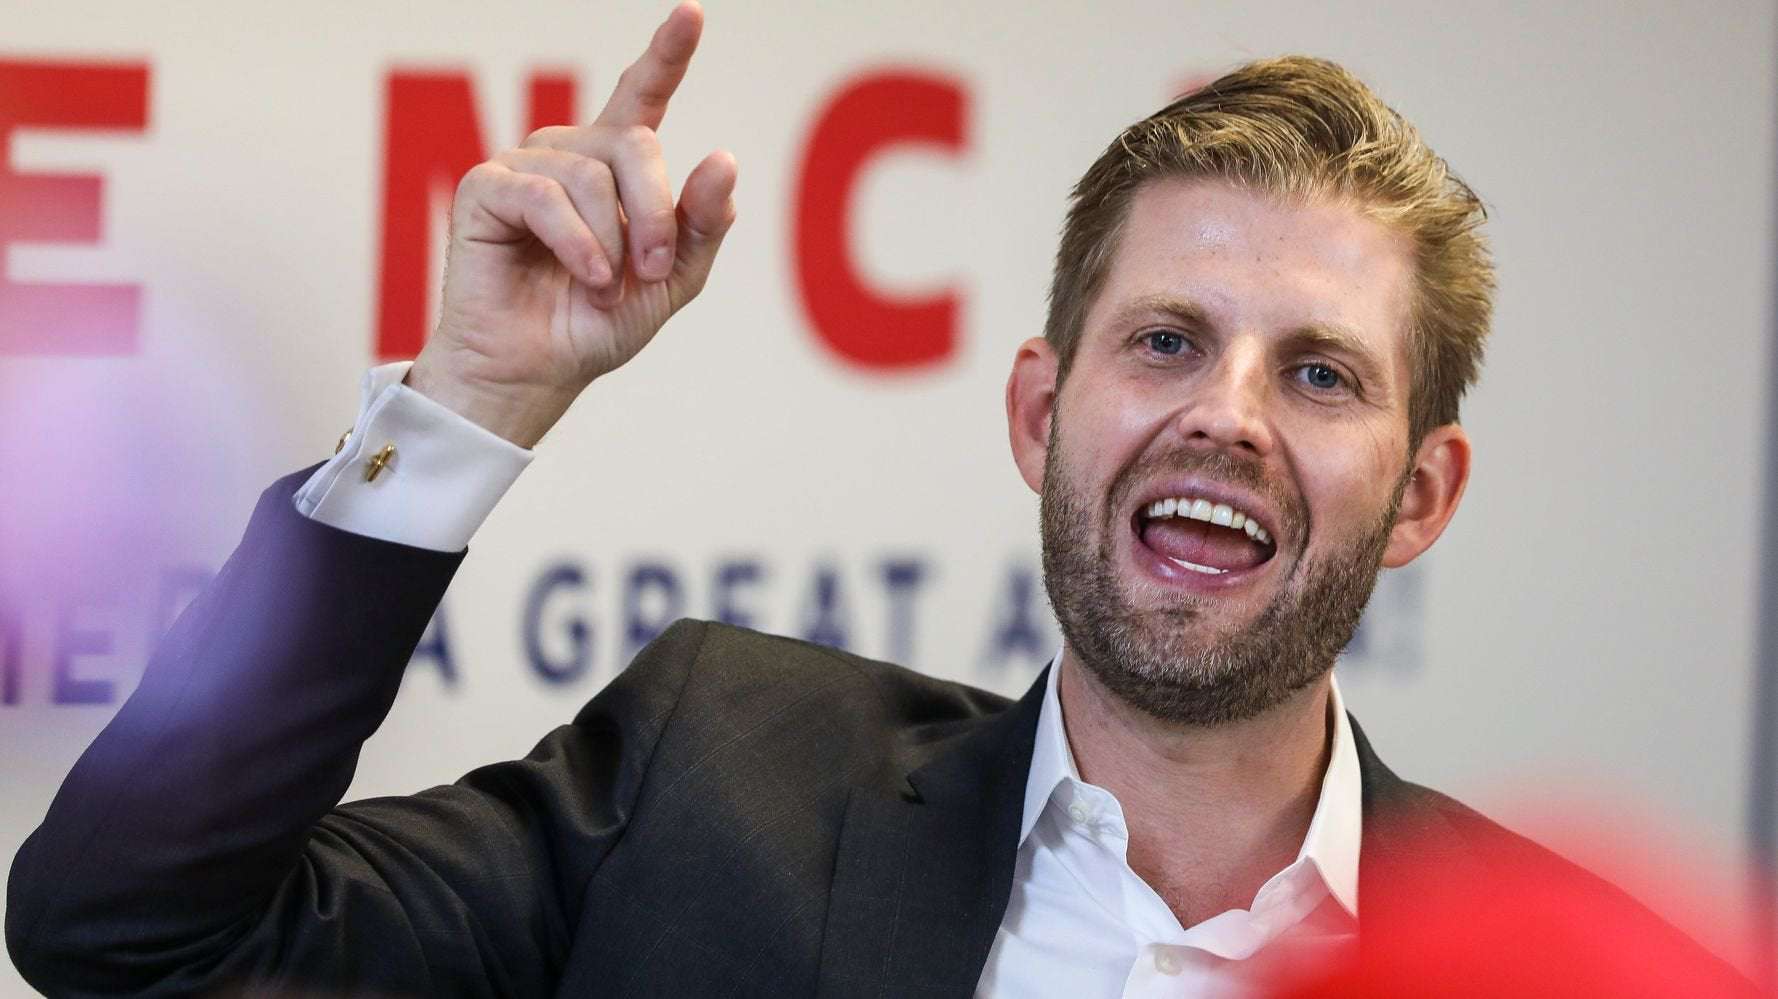 image for Jan. 6 Organizers Reportedly Used Burner Phones To Communicate With Eric Trump